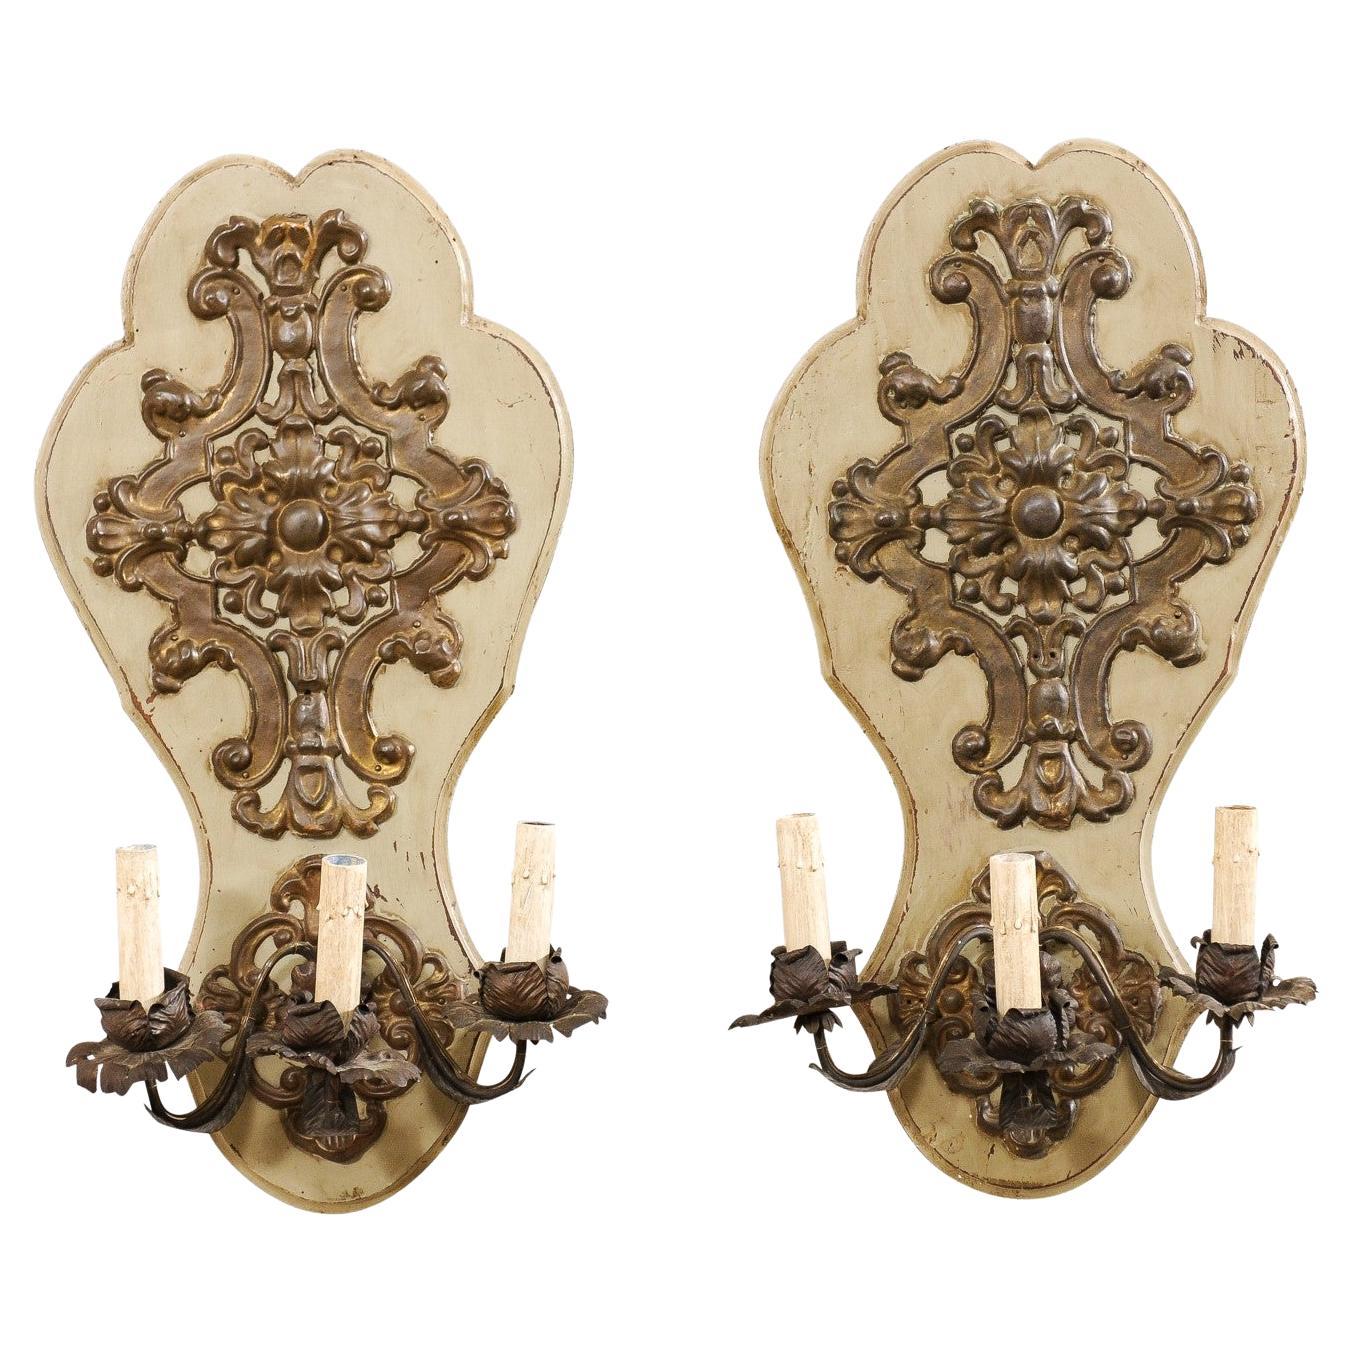 French Pair Antique 3-Light Wall Sconces